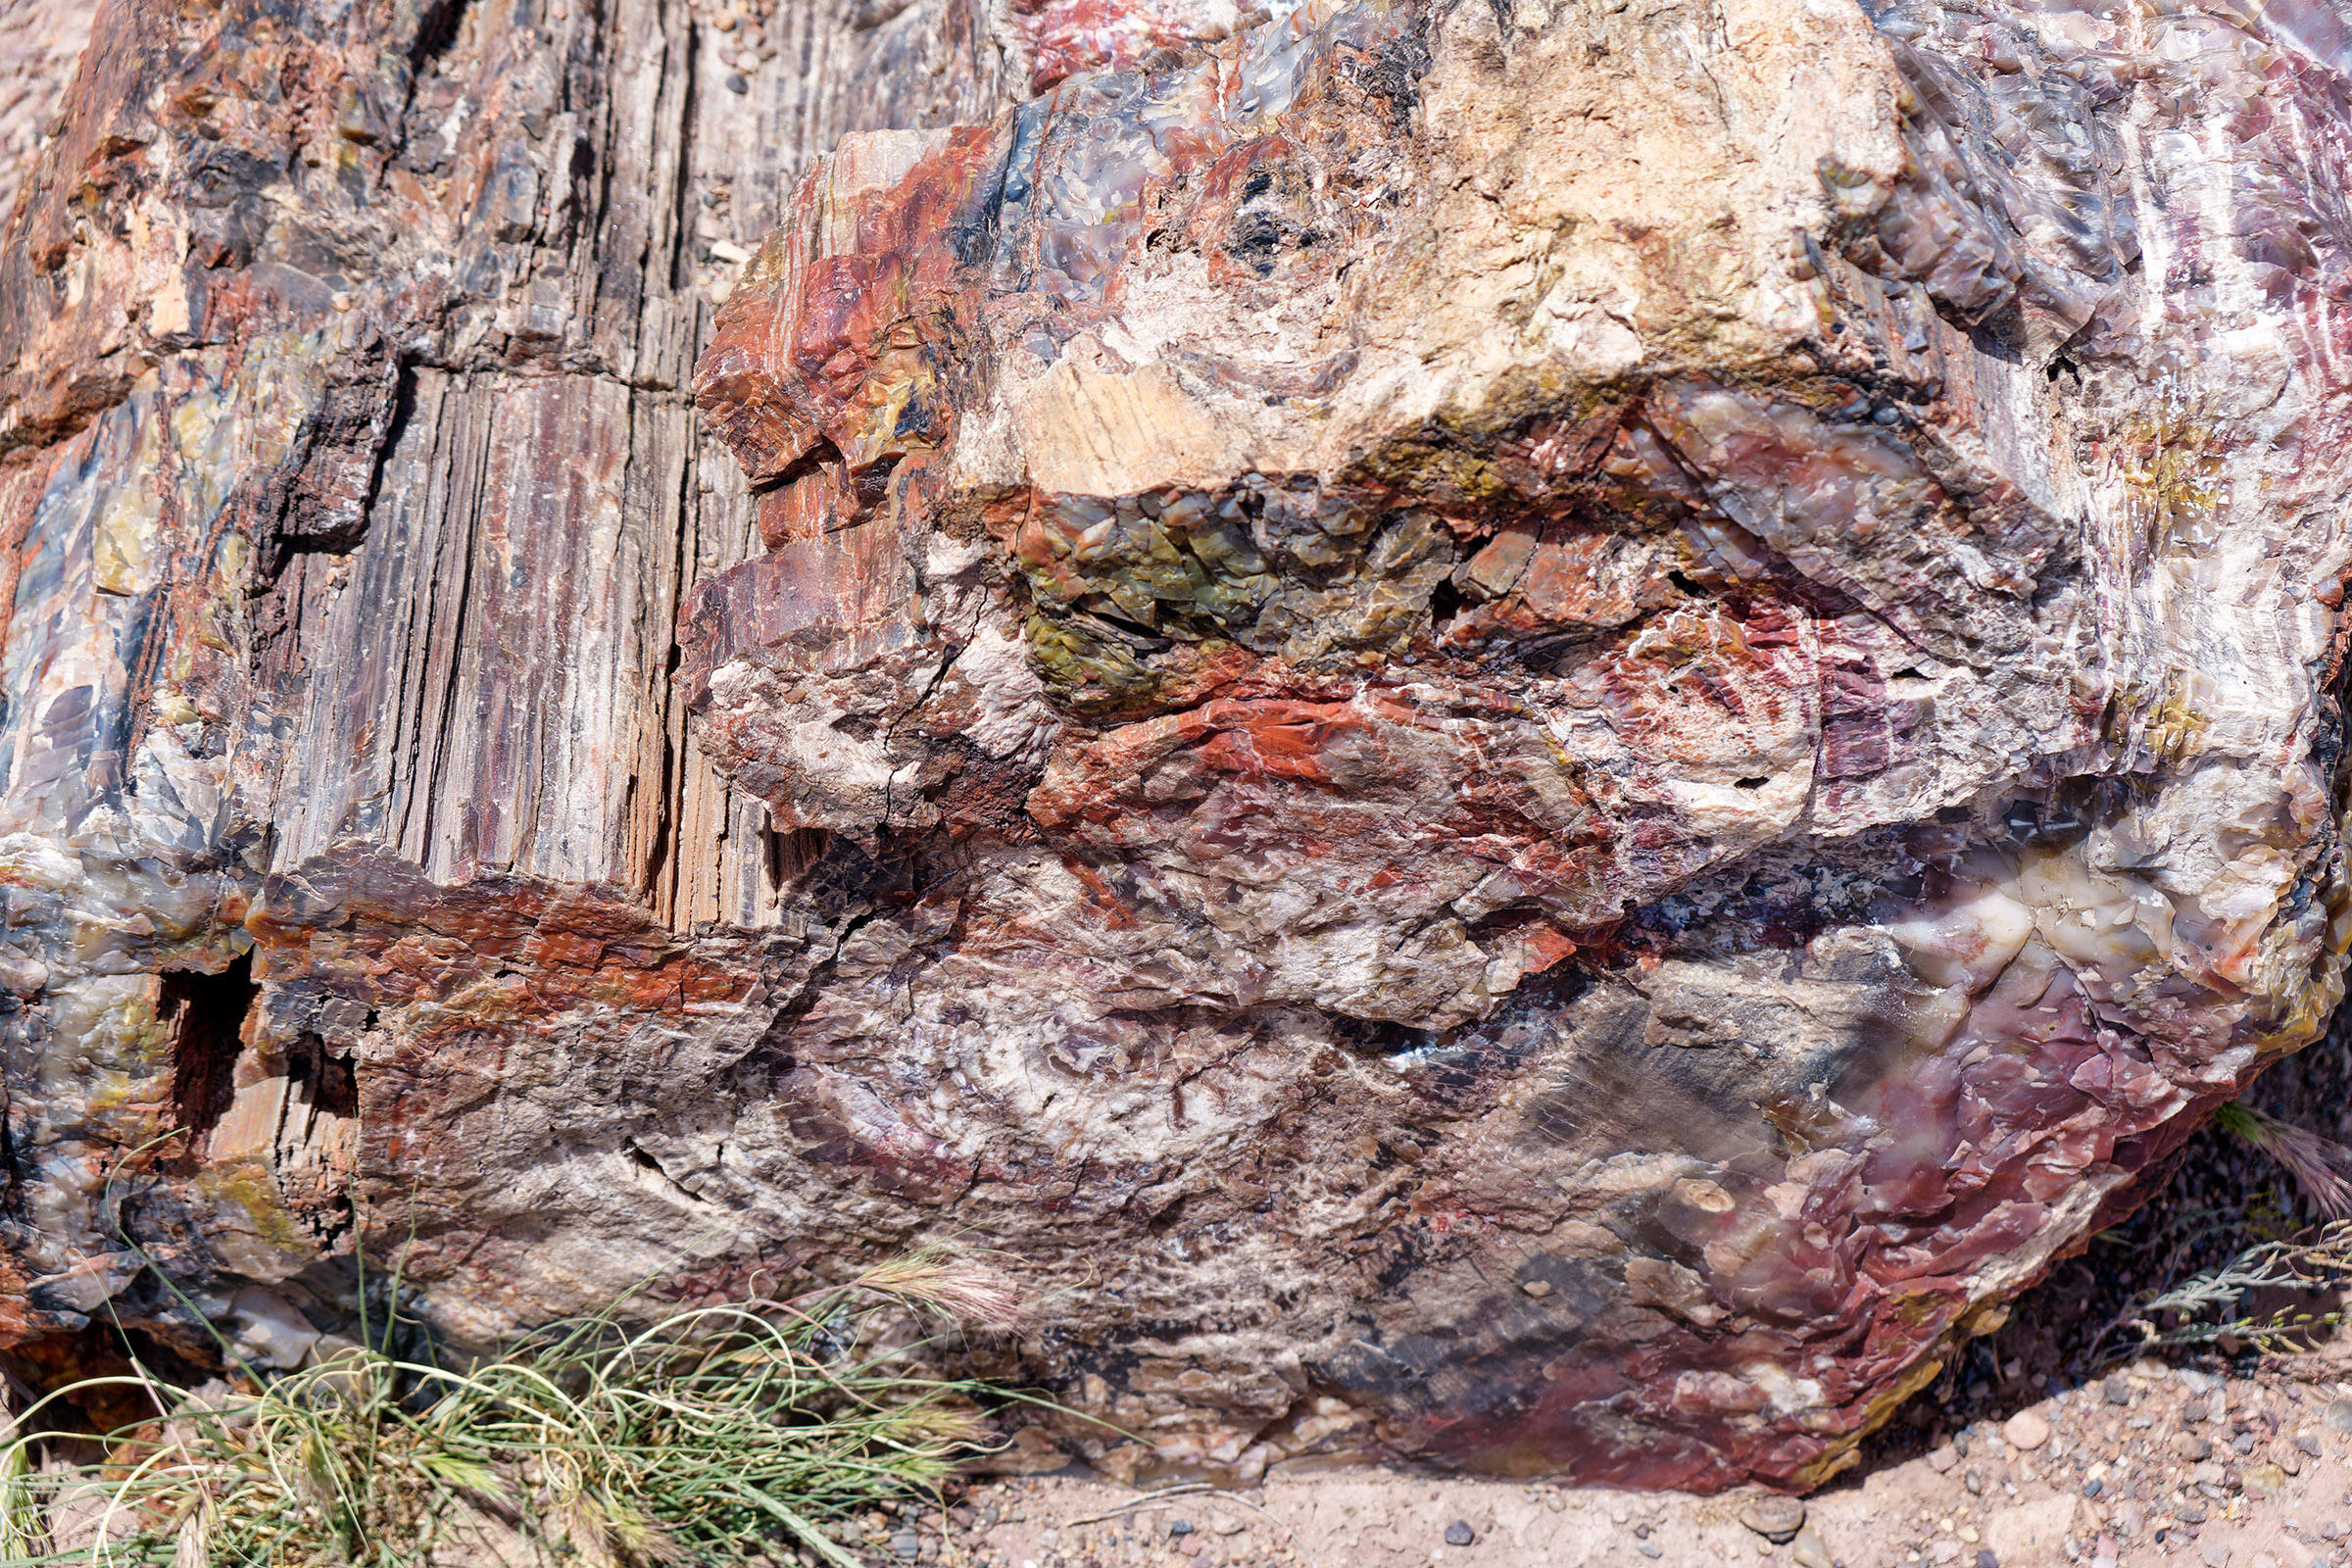 The colors of the petrified wood are gorgeous